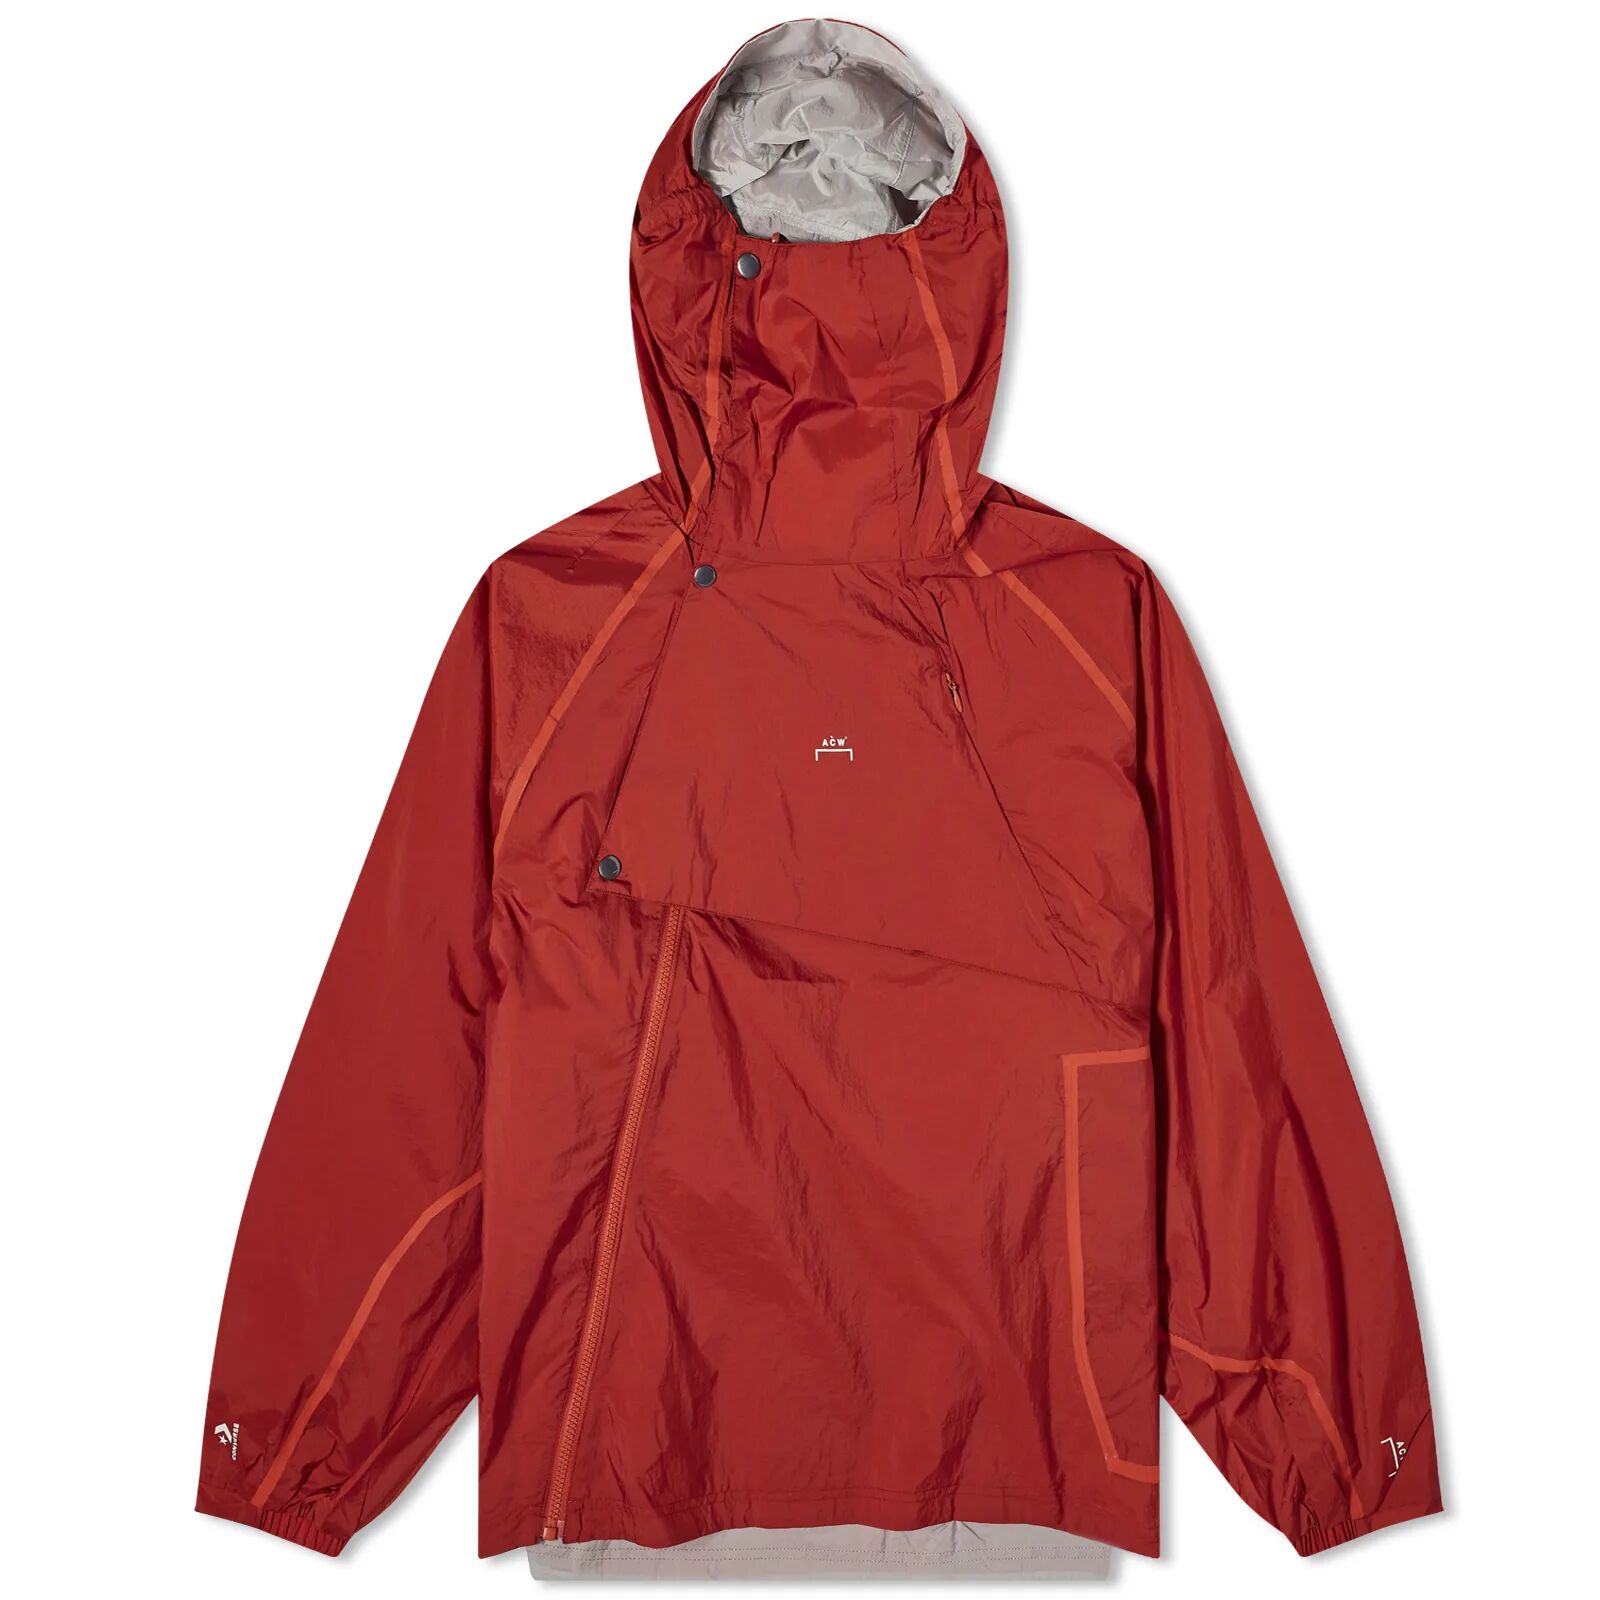 Converse x A-COLD-WALL* Wind Jacket in Rust Oxide, Size Medium